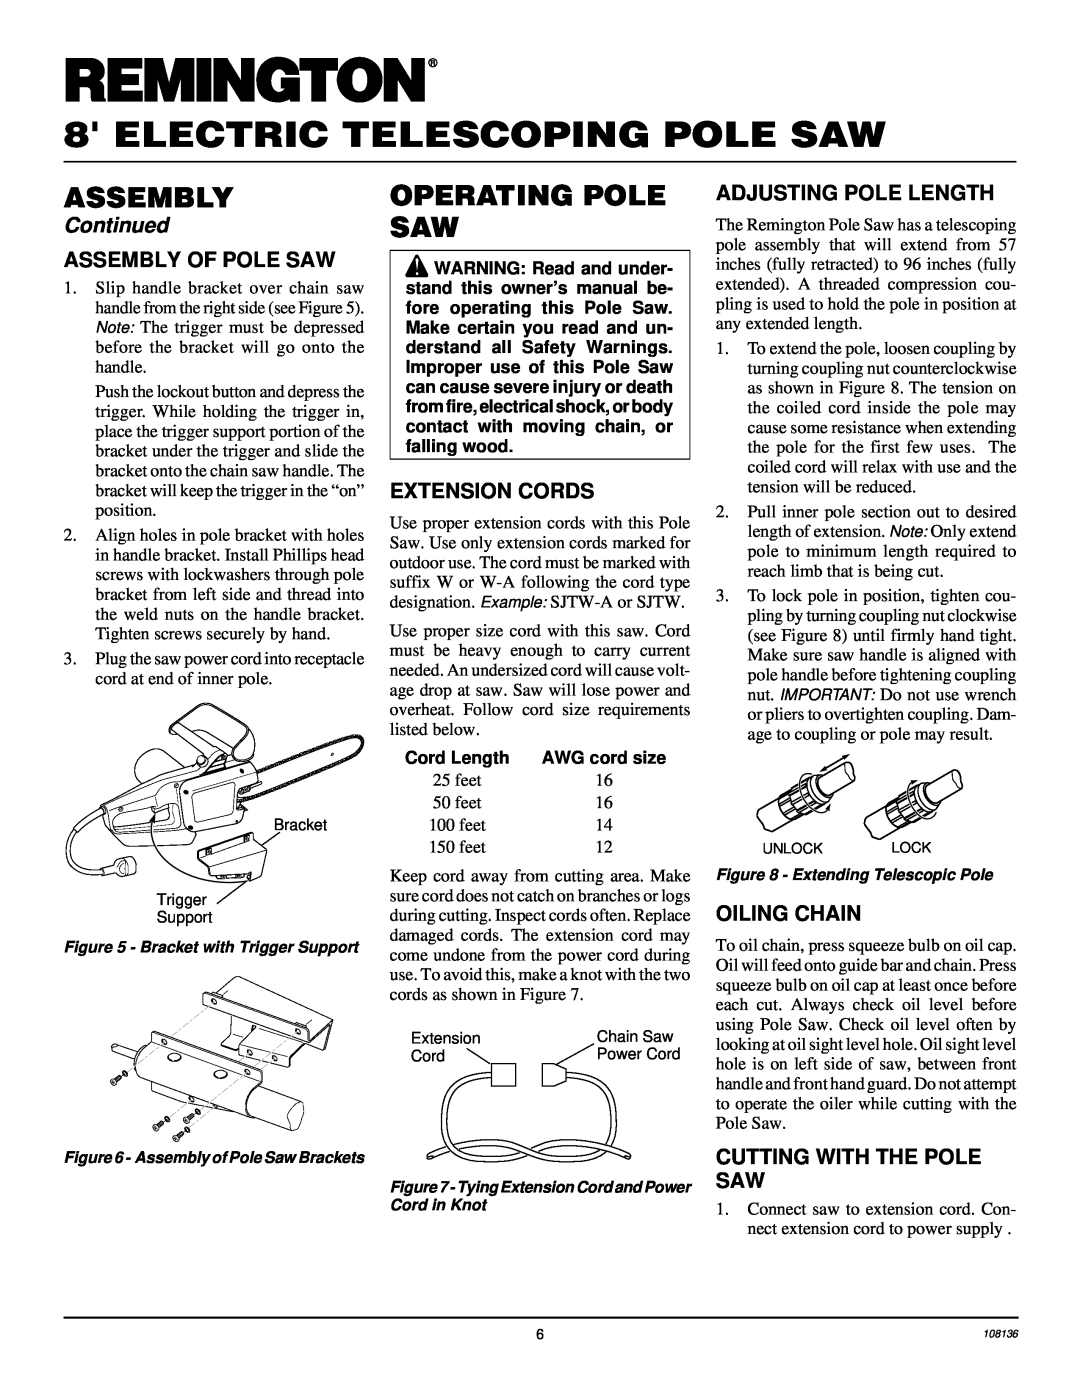 Remington RPS96 Operating Pole Saw, Assembly Of Pole Saw, Extension Cords, Adjusting Pole Length, Oiling Chain, Continued 